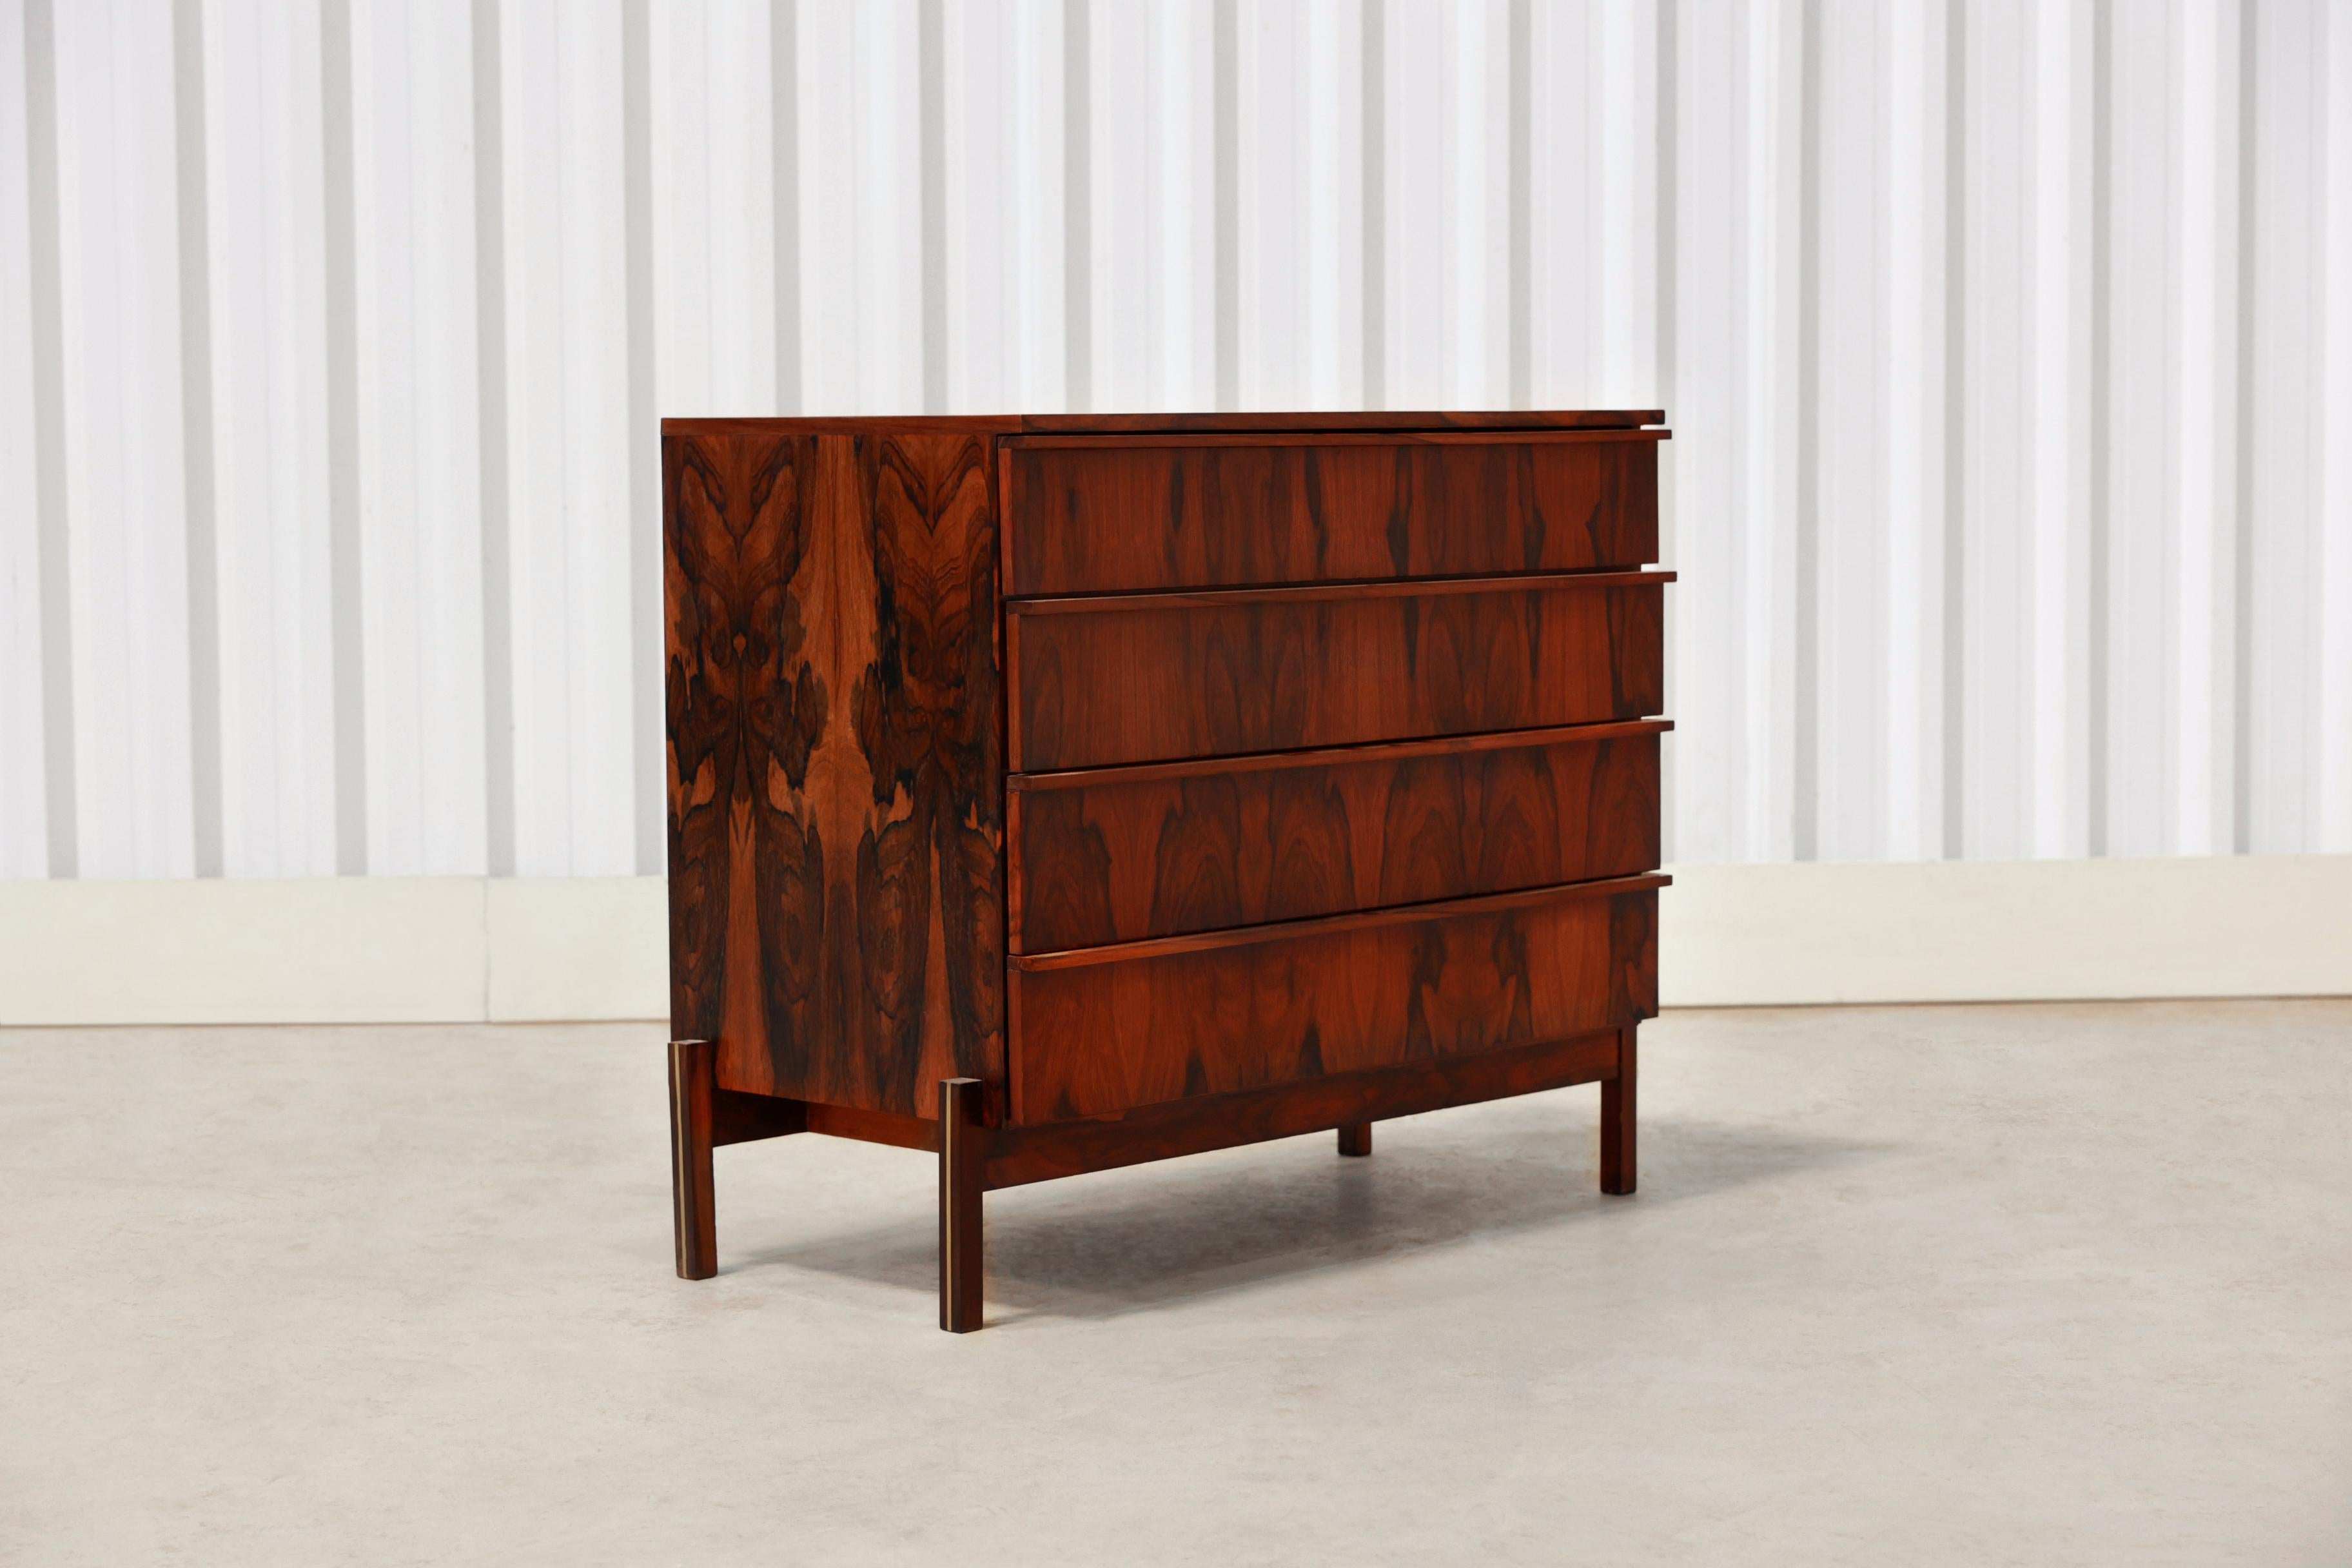 Brazilian Mid-century Modern Chest of Drawers in Hardwood by Cimo, Brazil For Sale